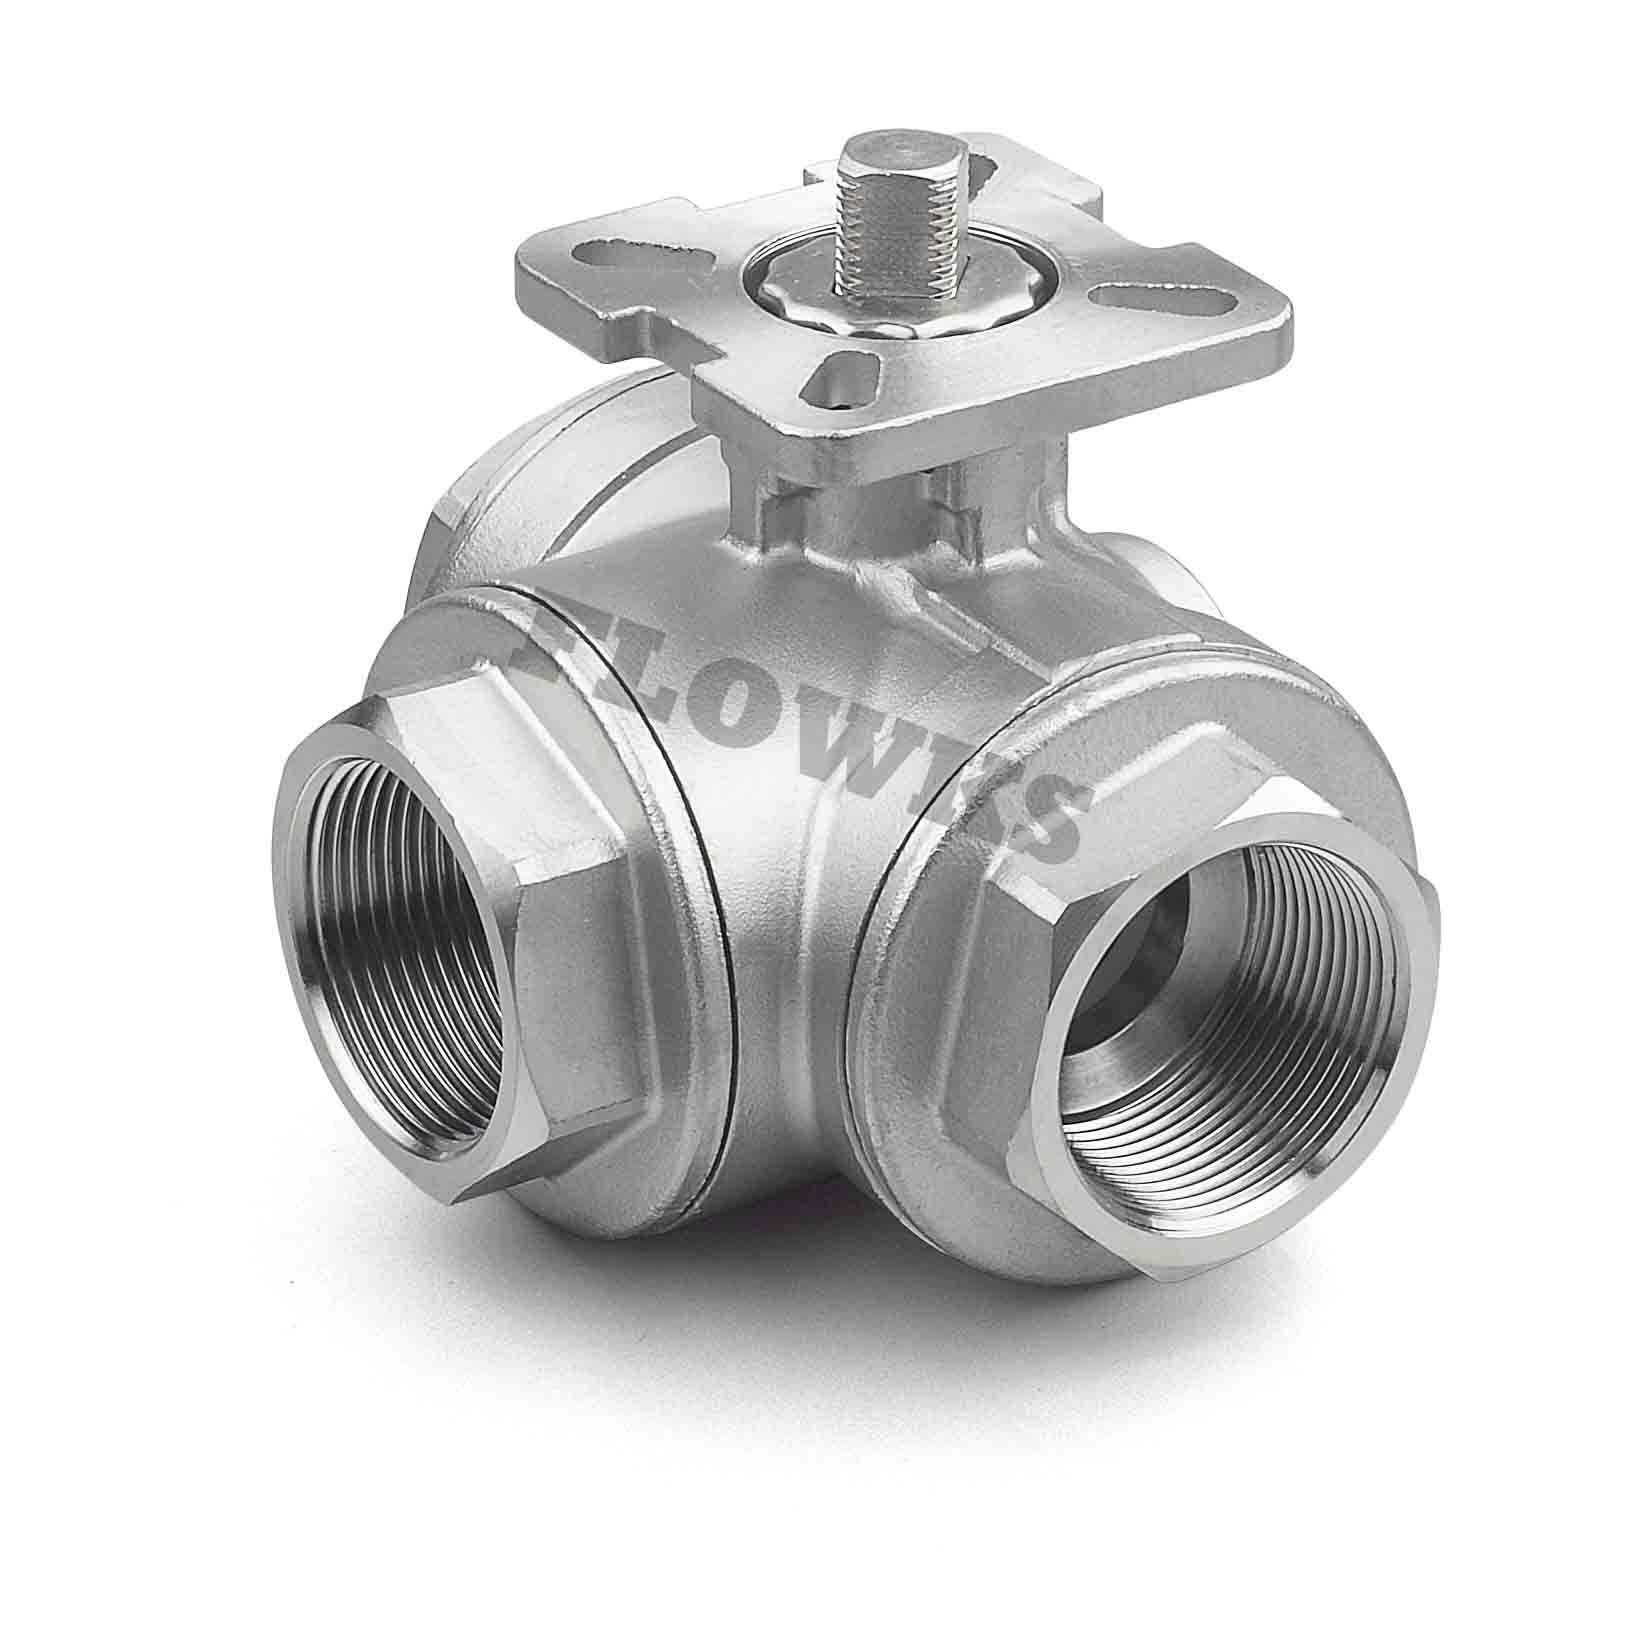 3-Way Screw Ball Valve with Mounting Pad